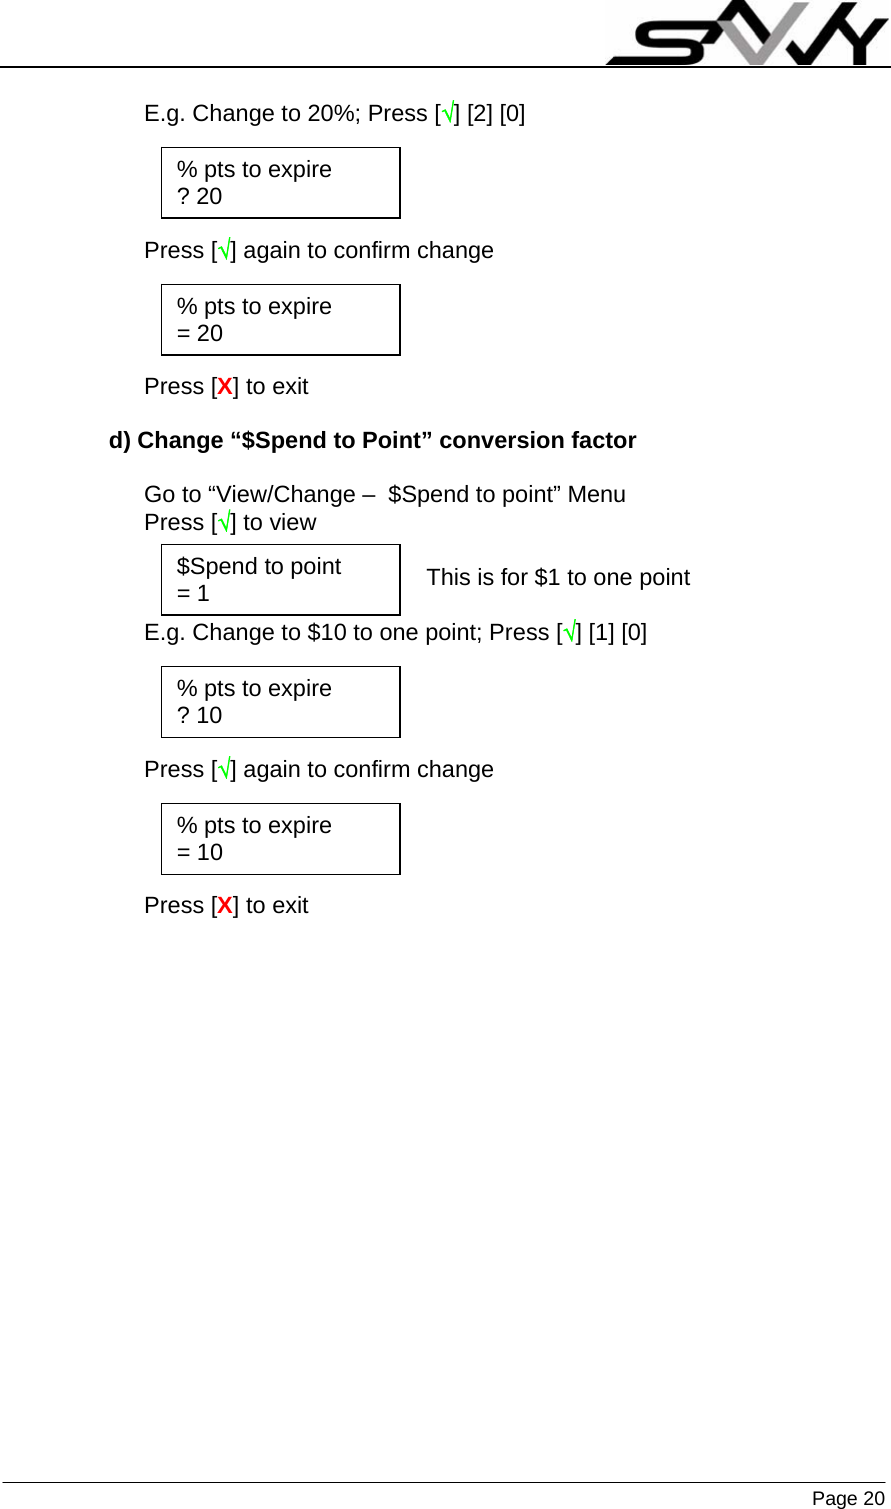                    Page 20   E.g. Change to 20%; Press [√] [2] [0]     Press [√] again to confirm change     Press [X] to exit  d) Change “$Spend to Point” conversion factor  Go to “View/Change –  $Spend to point” Menu Press [√] to view  This is for $1 to one point  E.g. Change to $10 to one point; Press [√] [1] [0]     Press [√] again to confirm change     Press [X] to exit $Spend to point = 1 % pts to expire ? 20 % pts to expire = 20 % pts to expire ? 10 % pts to expire = 10 